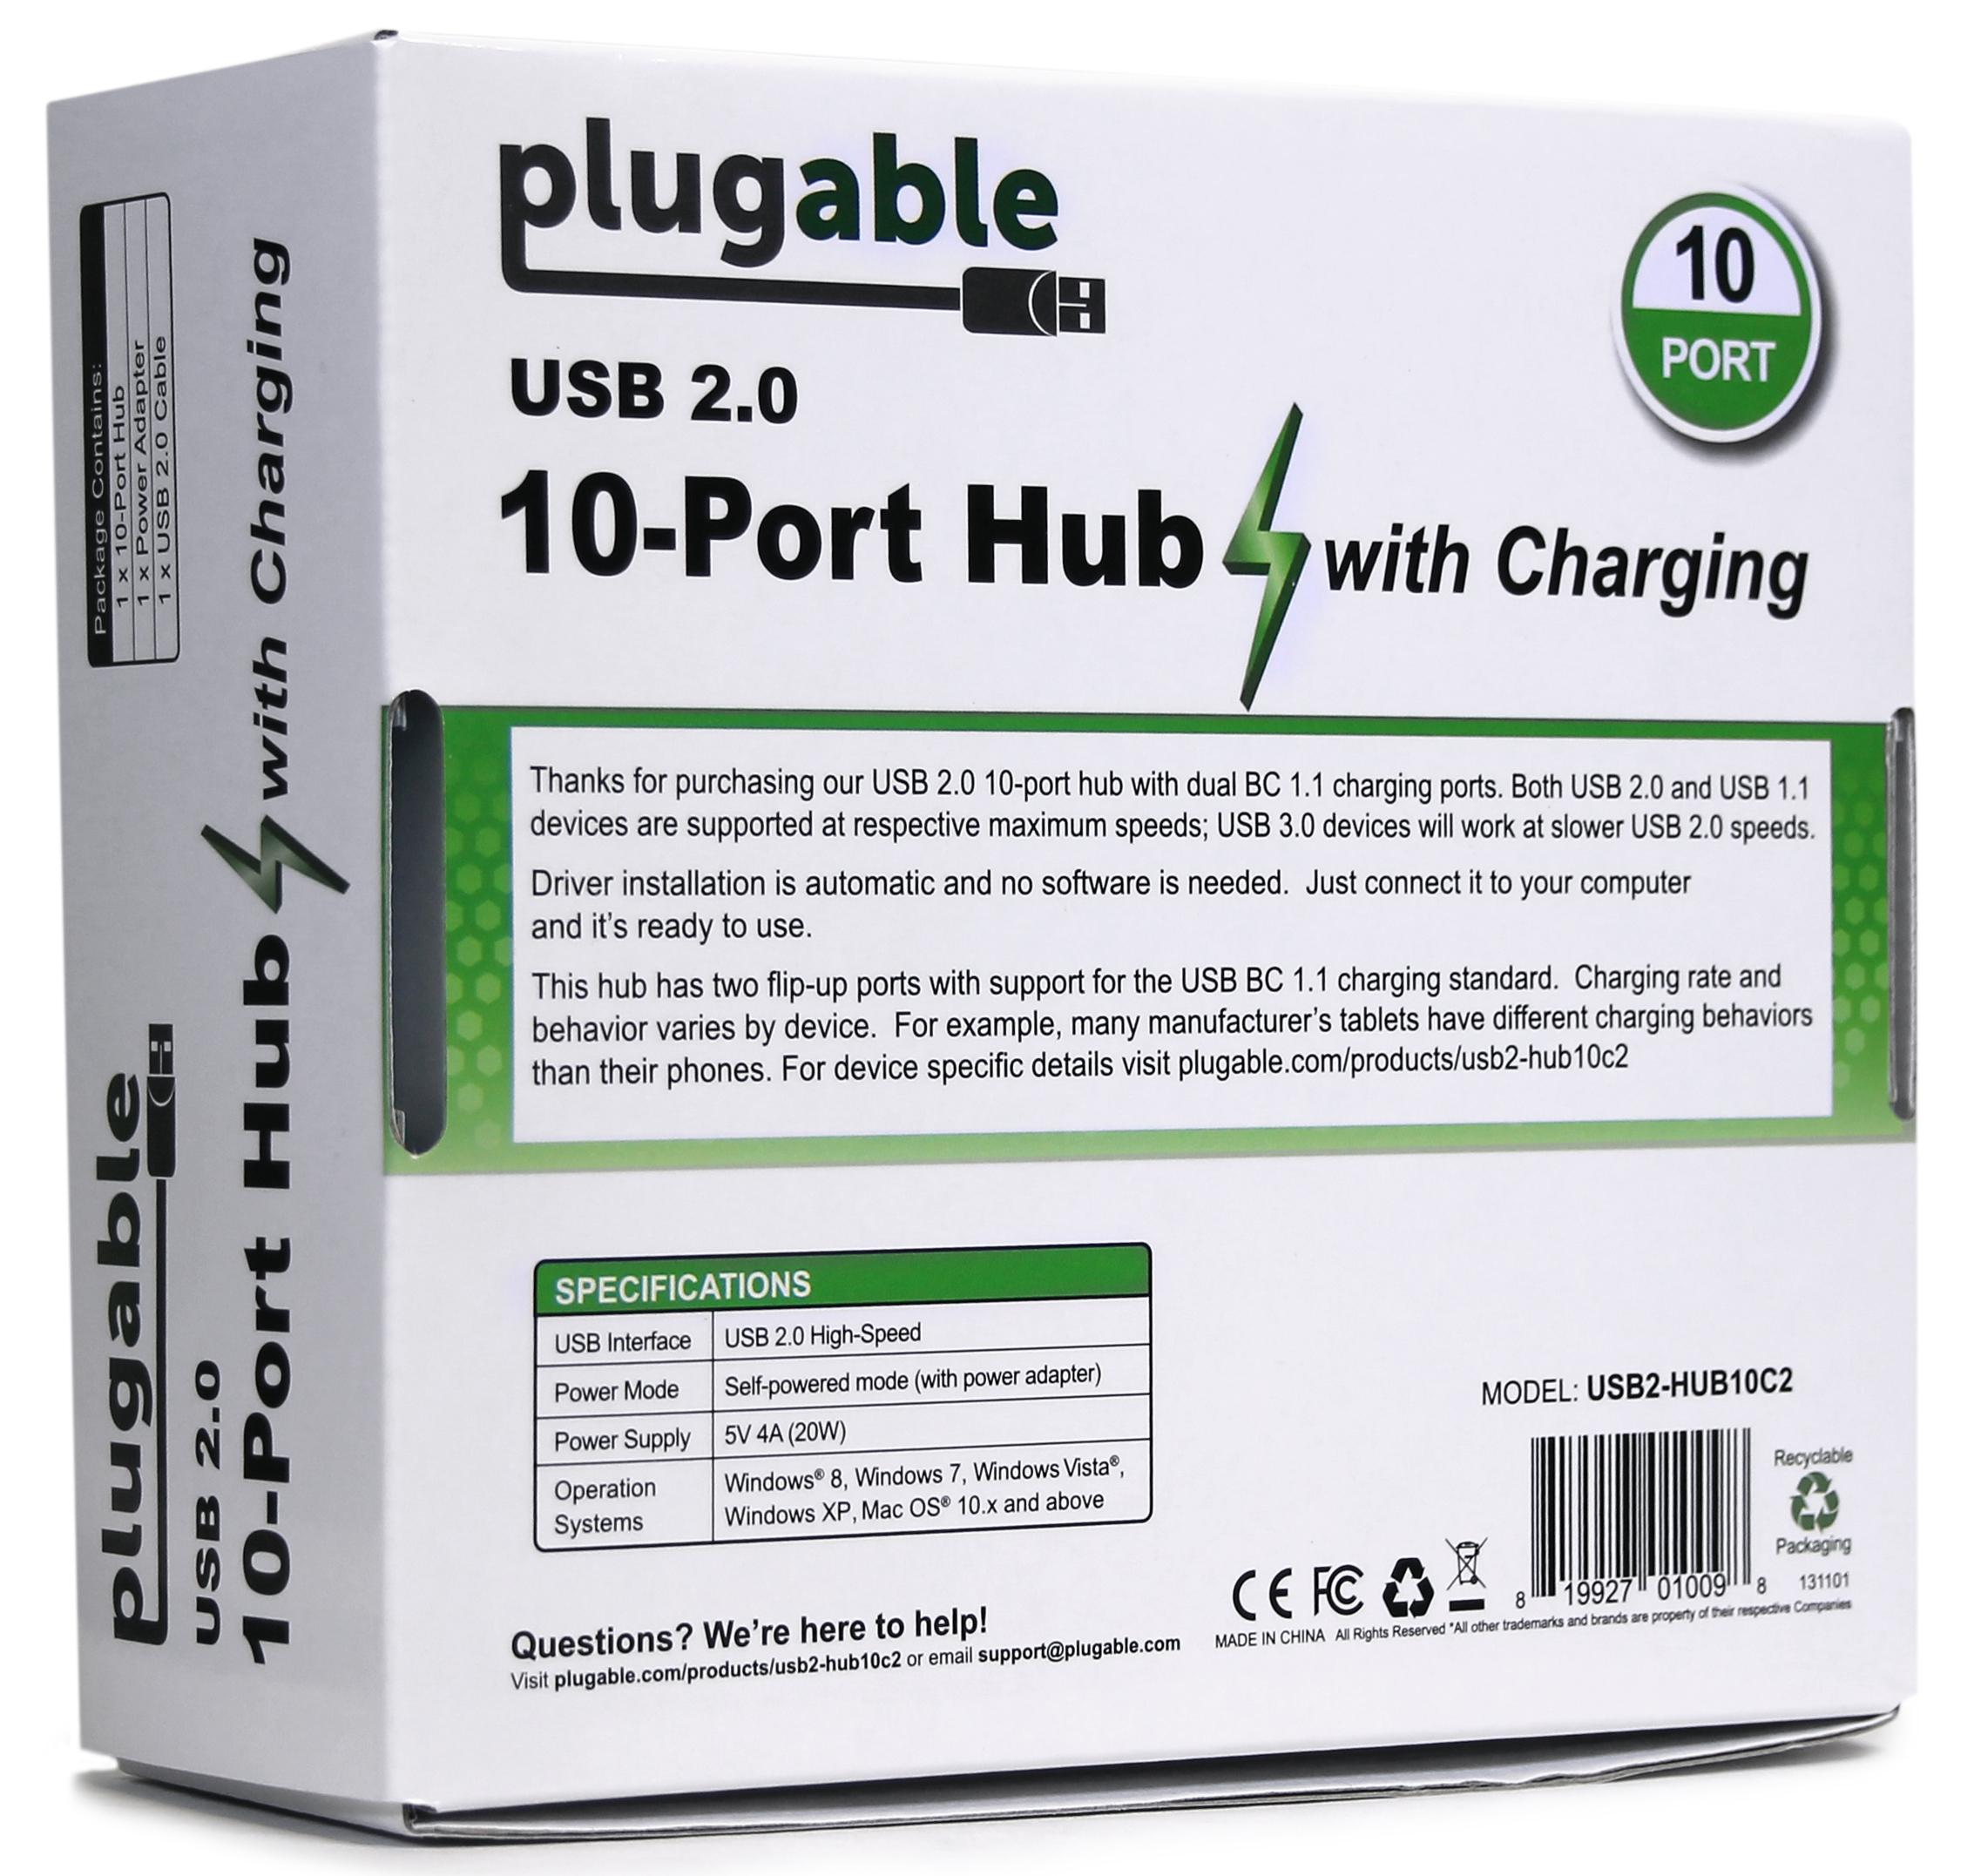 Plugable USB Hub, 10 Port - USB 2.0 with 20W Power Adapter and Two Flip-Up Ports - image 5 of 6